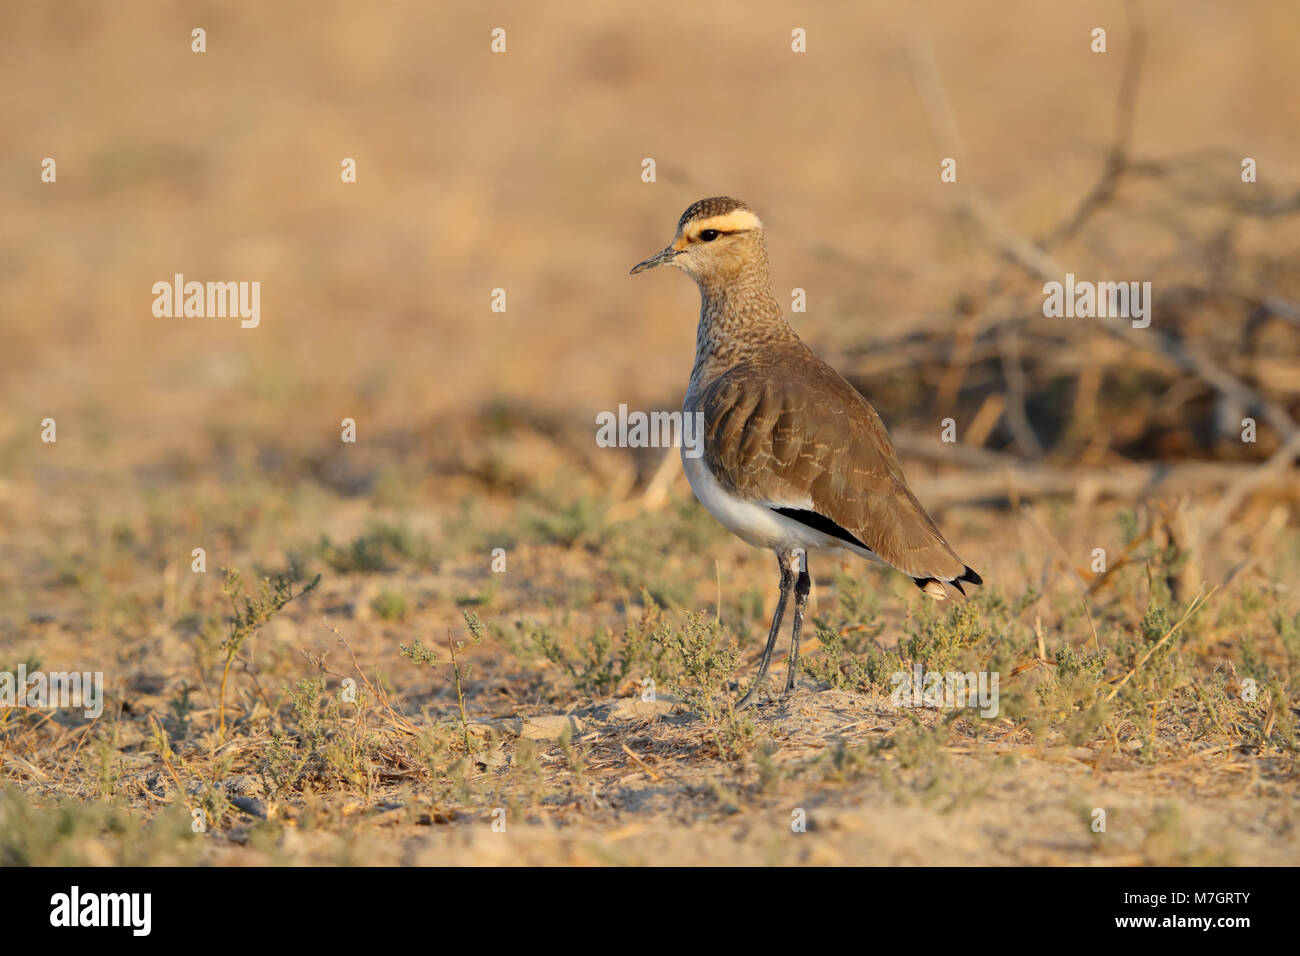 Sociable Lapwing or Sociable Plover (Vanellus gregarius) adult in non-breeding plumage in the Kutch area of Gujarat, India Stock Photo